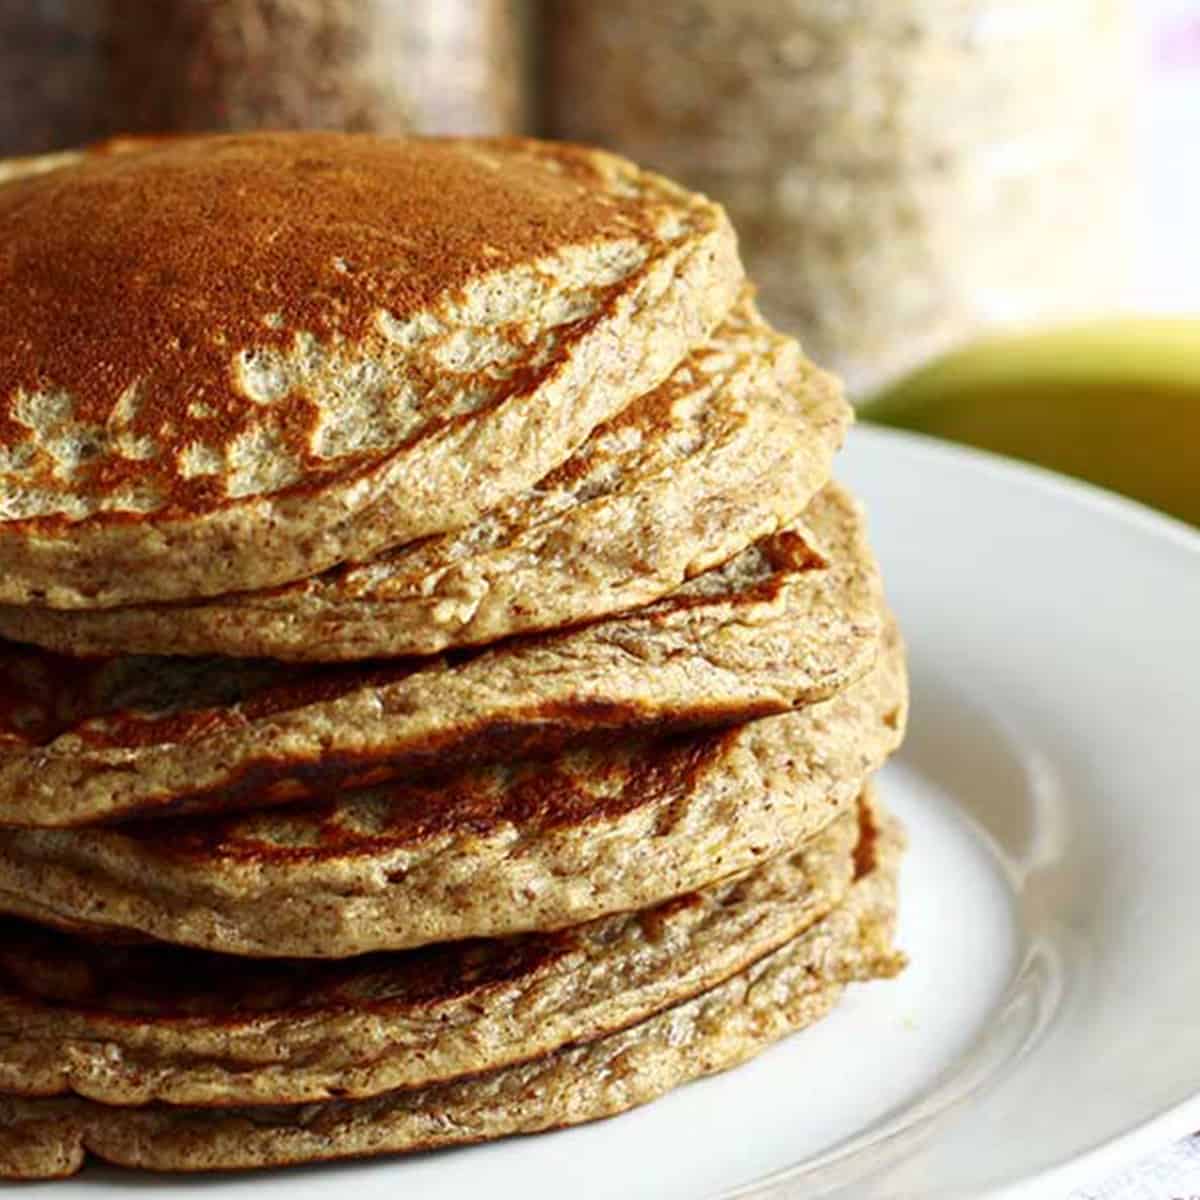 7 Ways to Add Extra Nutrition to Pancakes